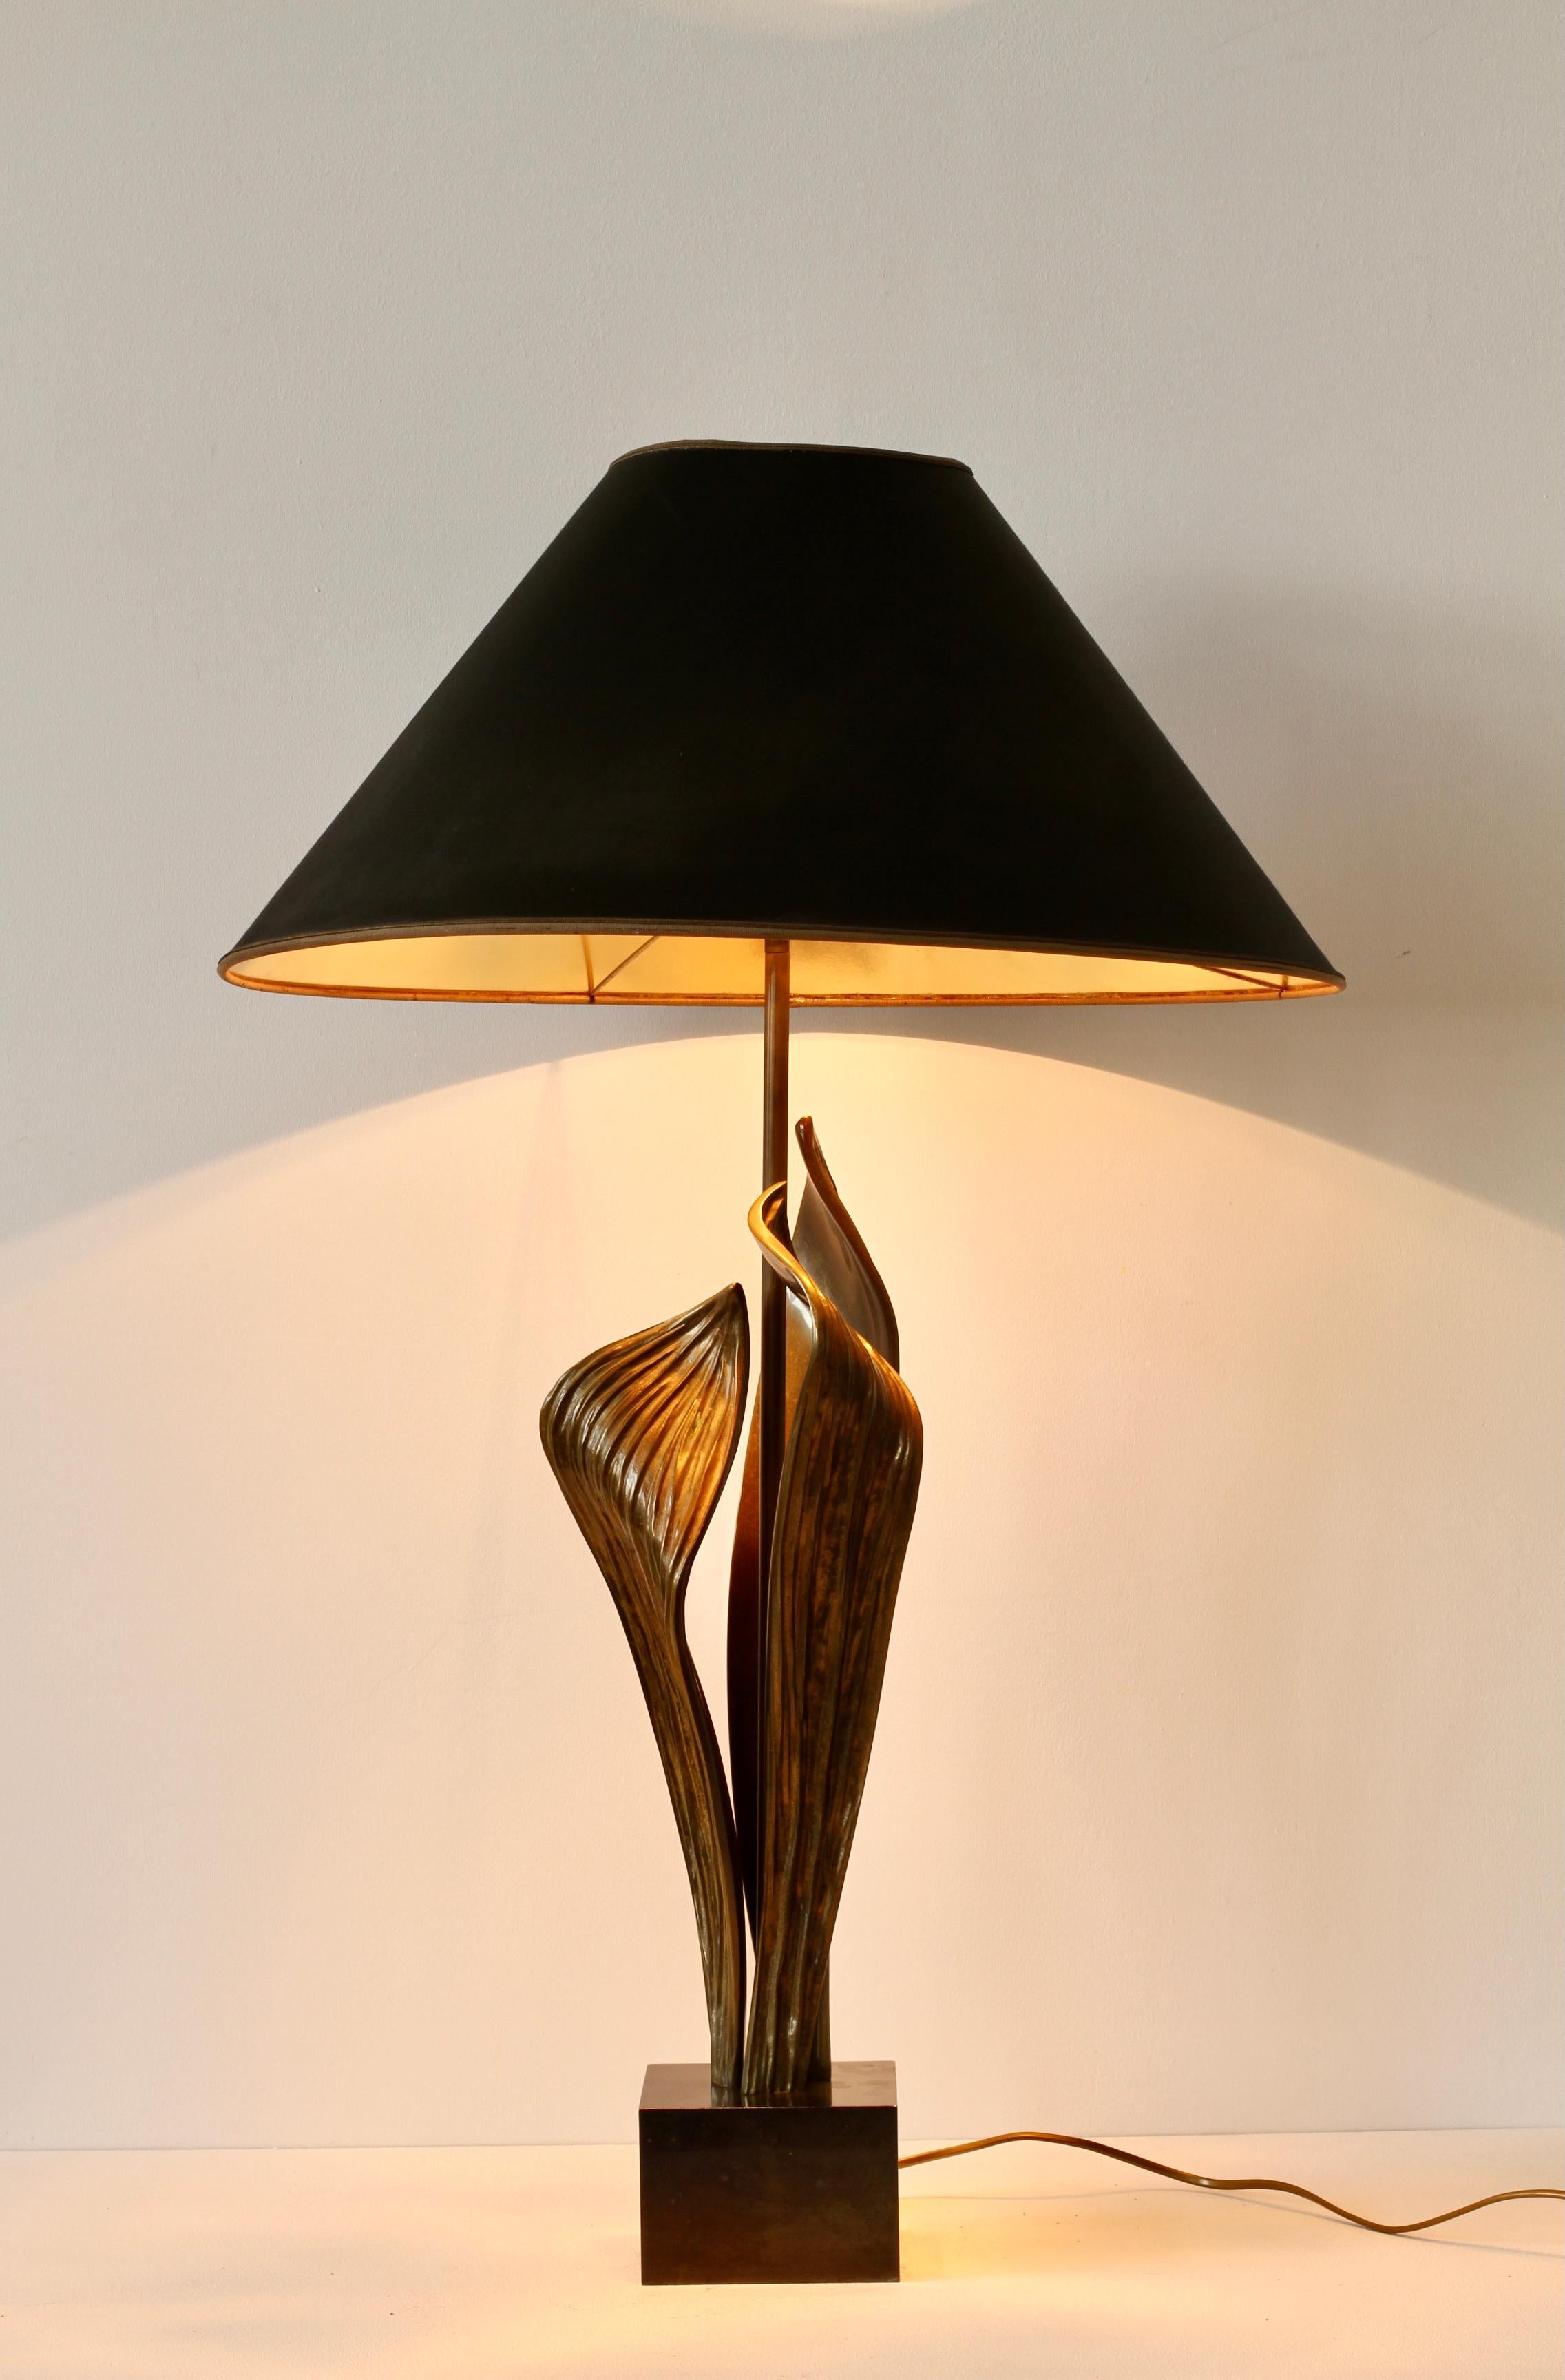 Chrystiane Charles for Maison Charles rare and very large tall early signed and numbered (number 23) cast brass 'Amaryllis' table lamp on a patinated metal base. Opulent, ornate and decadent, everything you would expect from beautifully crafted